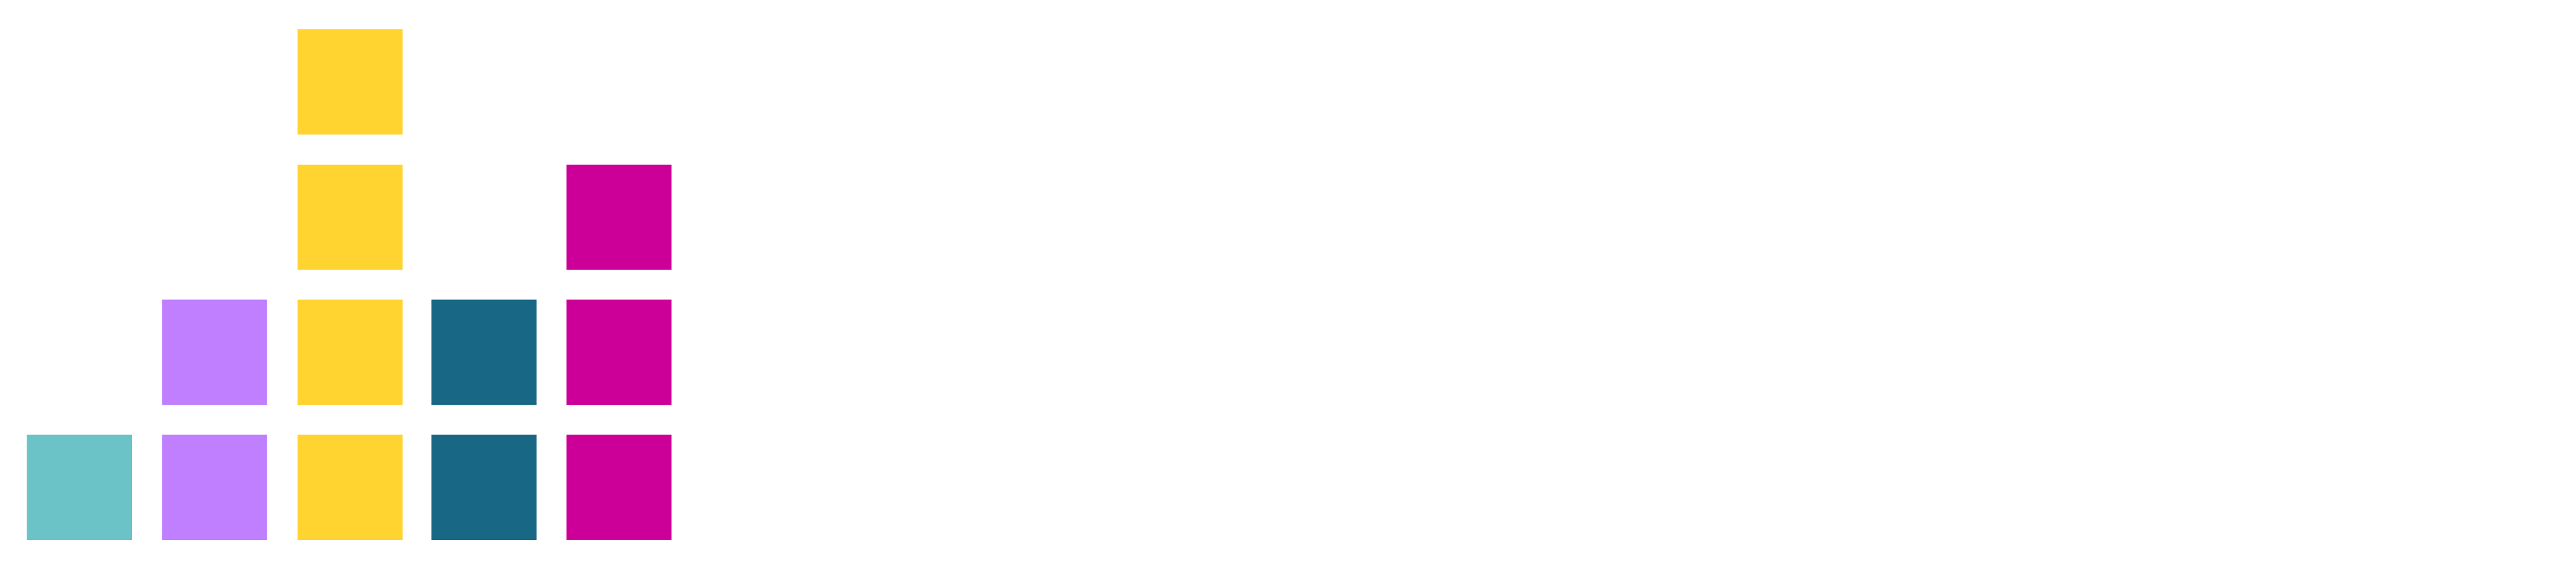 stackconf